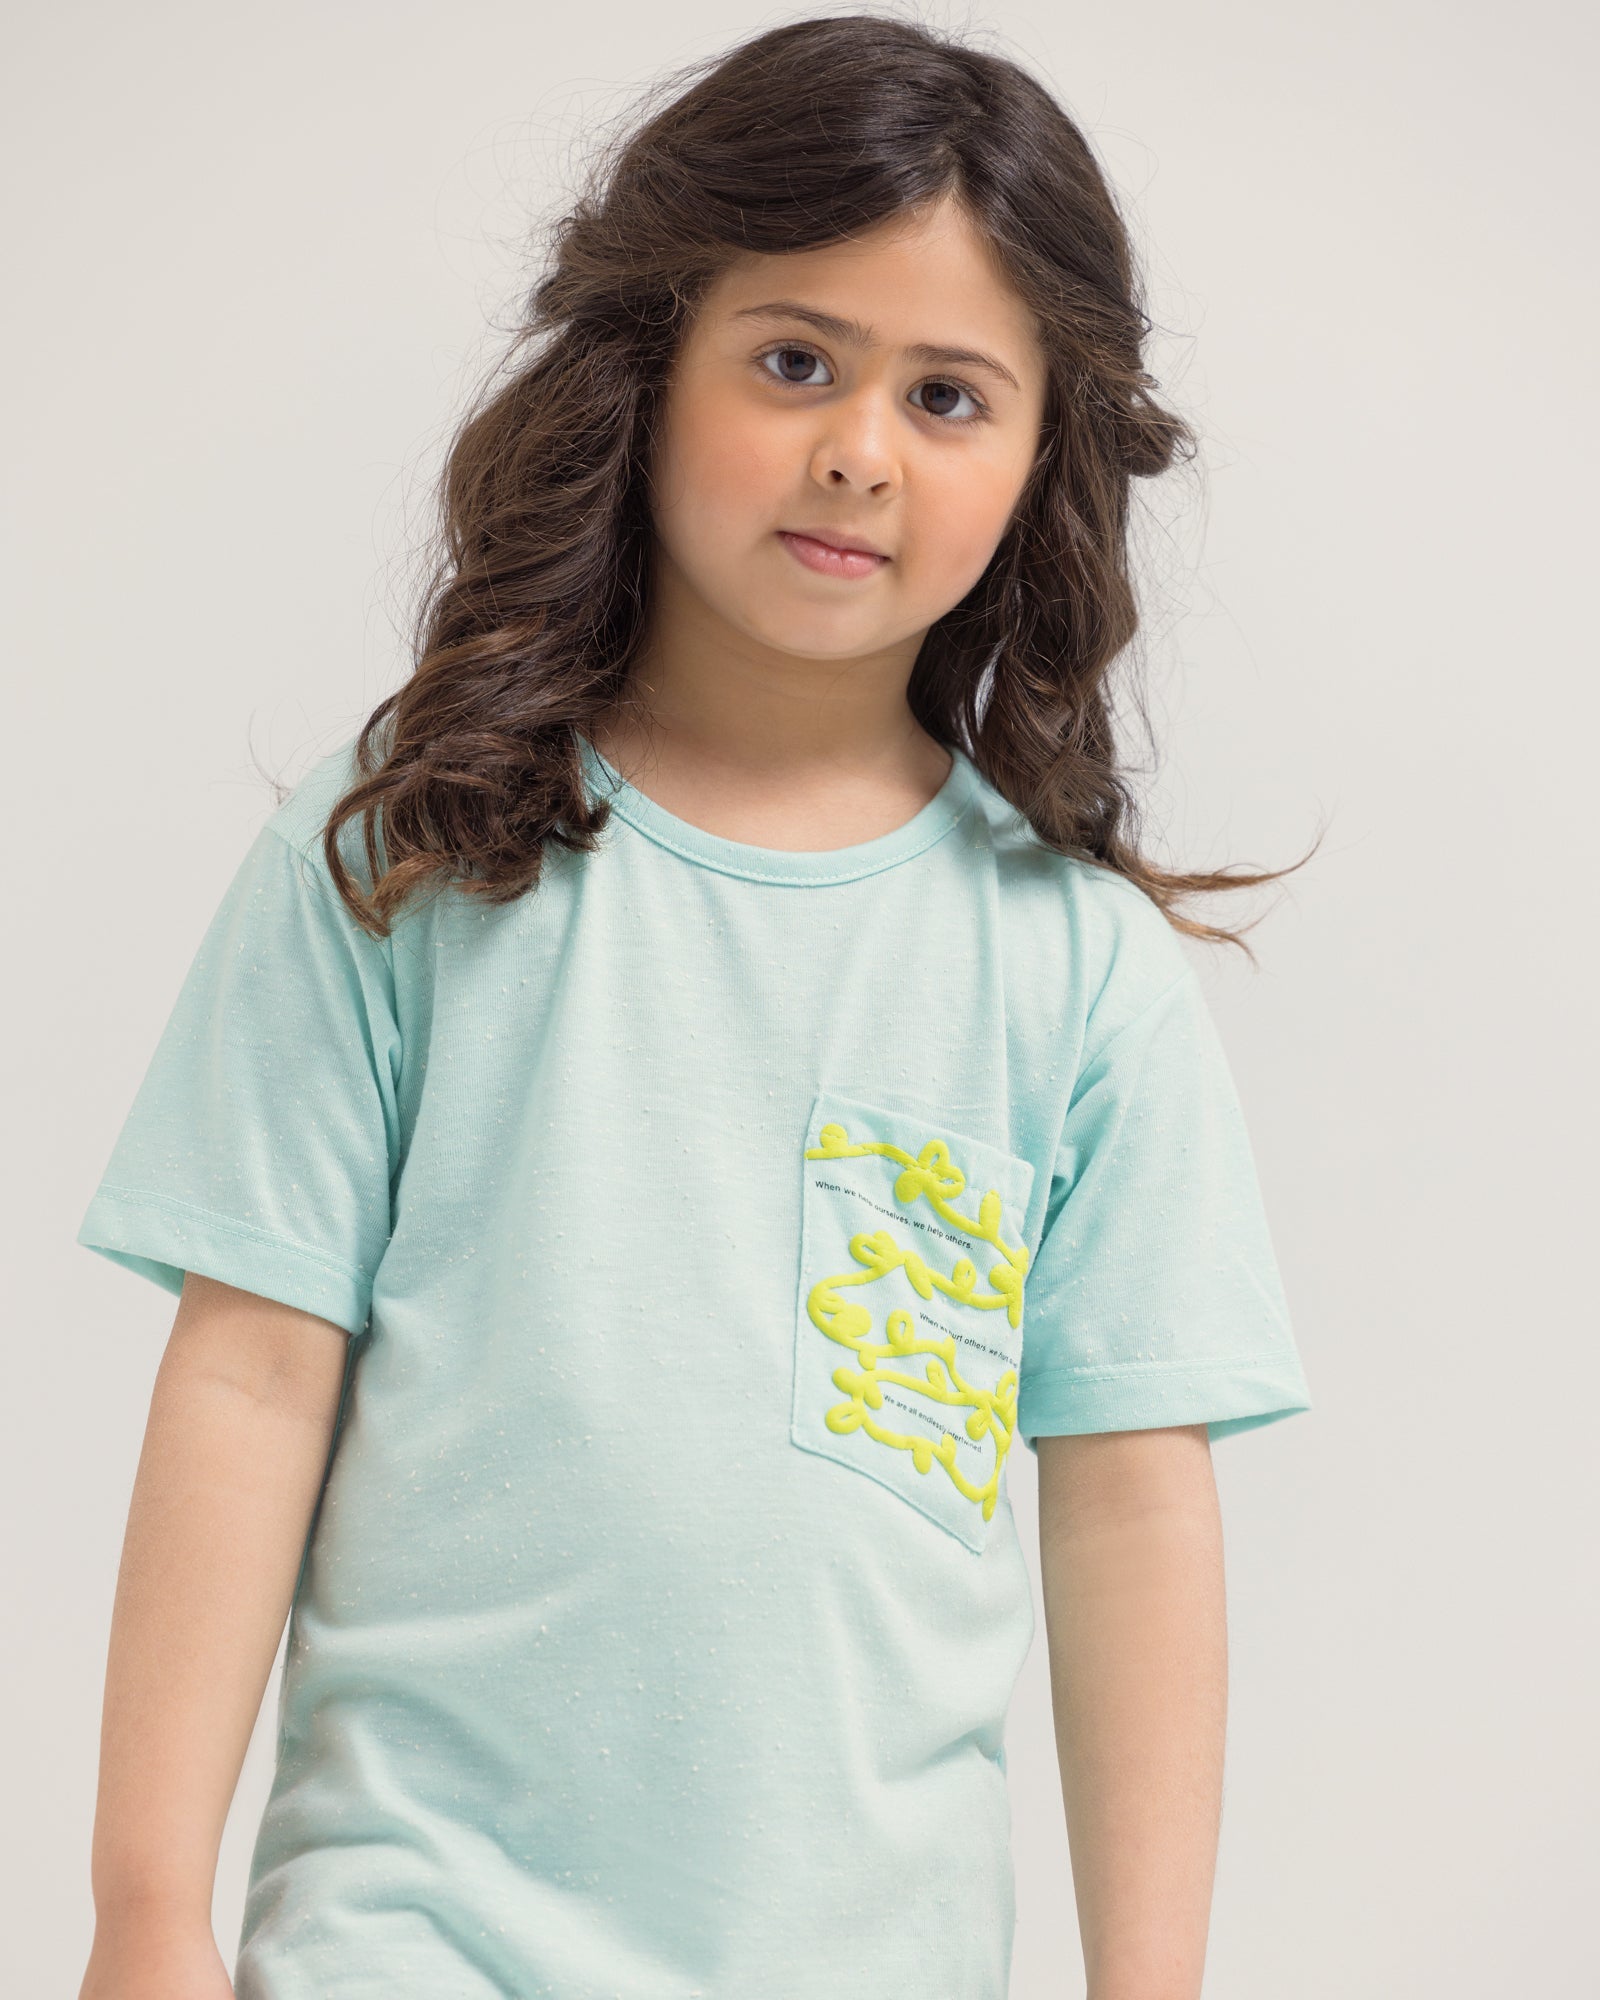 Girls Sea Green Color Graphic Tee S/S Knit Top For GIRLS - ENGINE